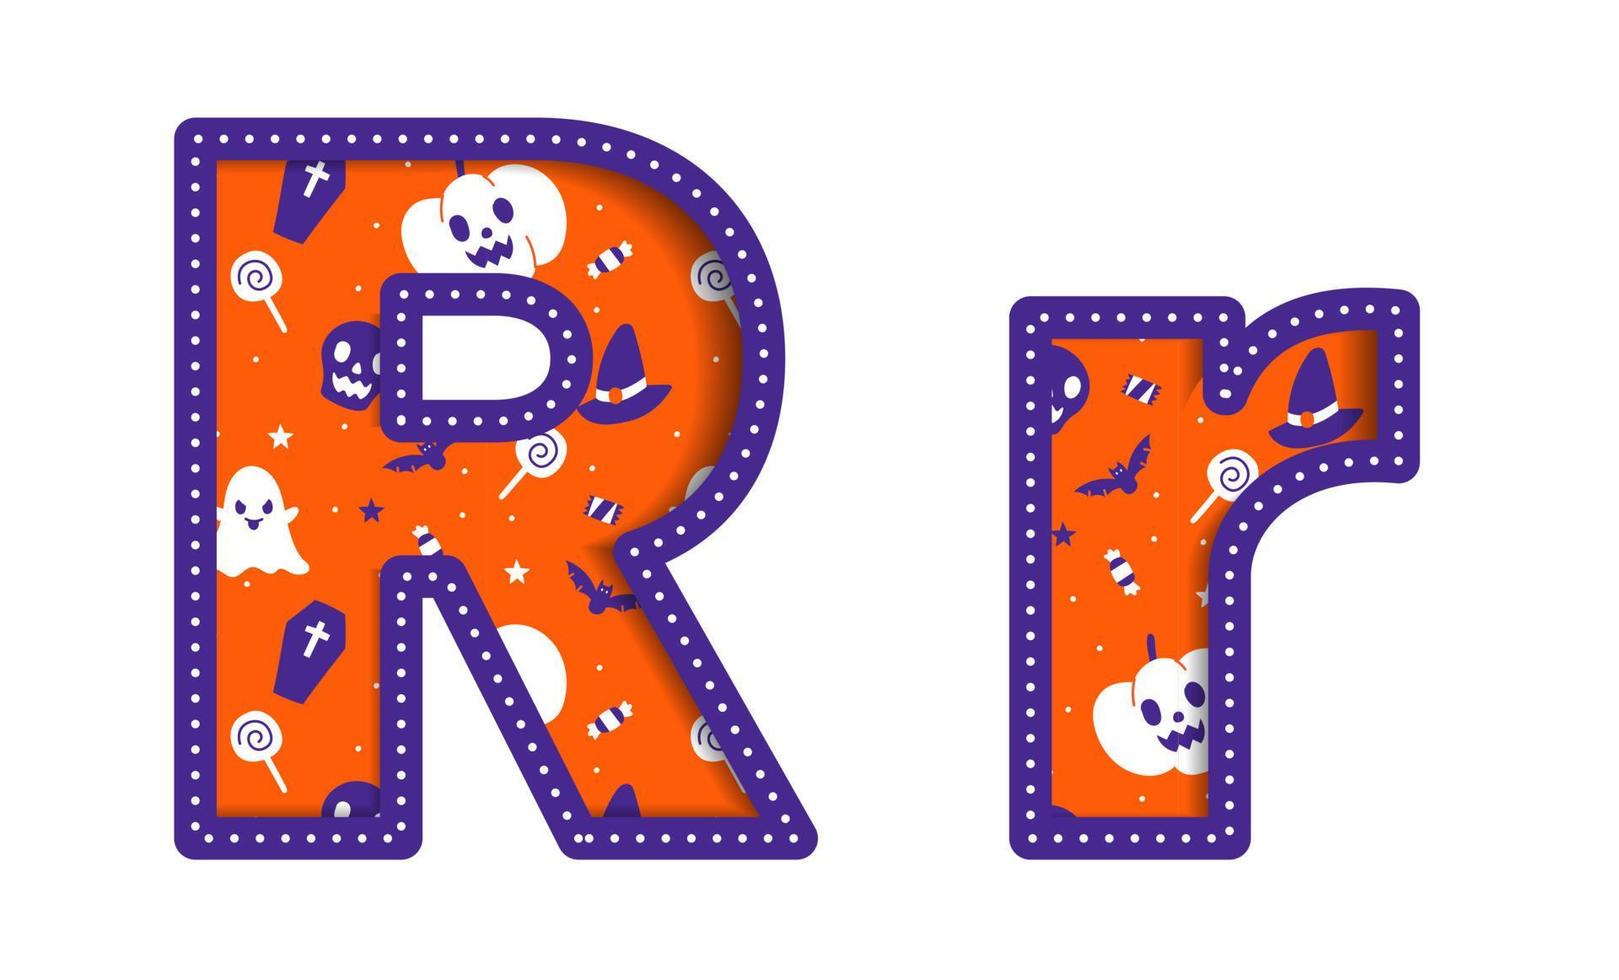 Cute Happy Halloween R Alphabet Capital Small Letter Party Font Typography Character Cartoon Spooky Horror colorful Paper Cutout Type design celebration vector Illustration Skull Pumpkin Bat Witch Hat